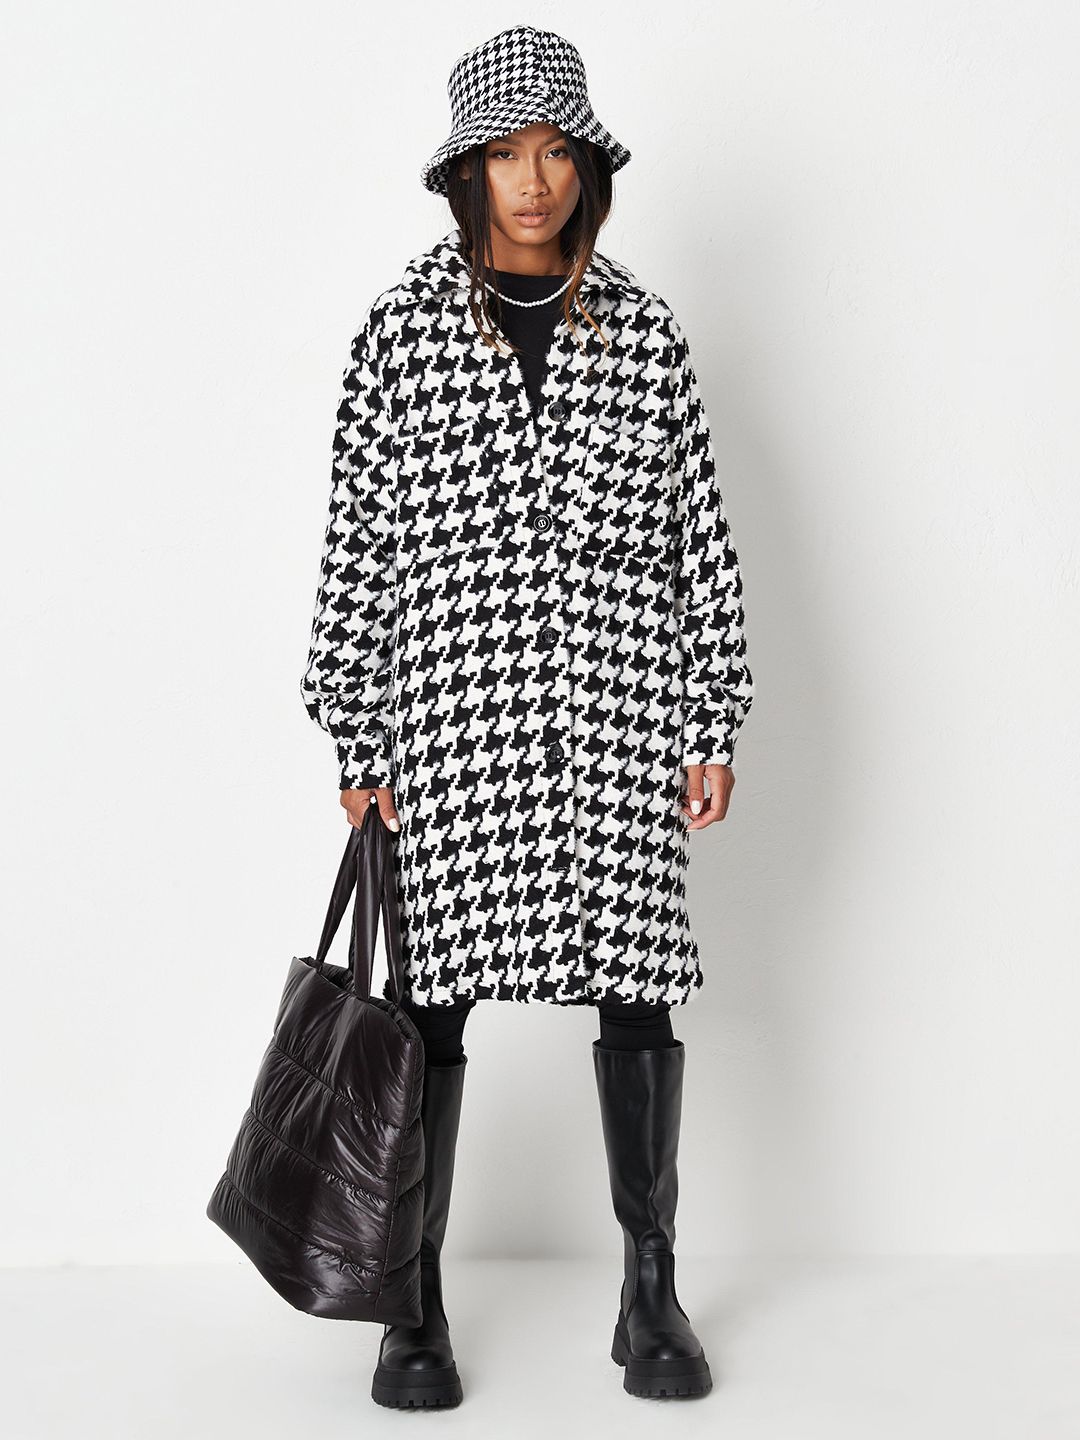 Missguided Women White Black Houndstooth Patterned Longline Shacket Price in India